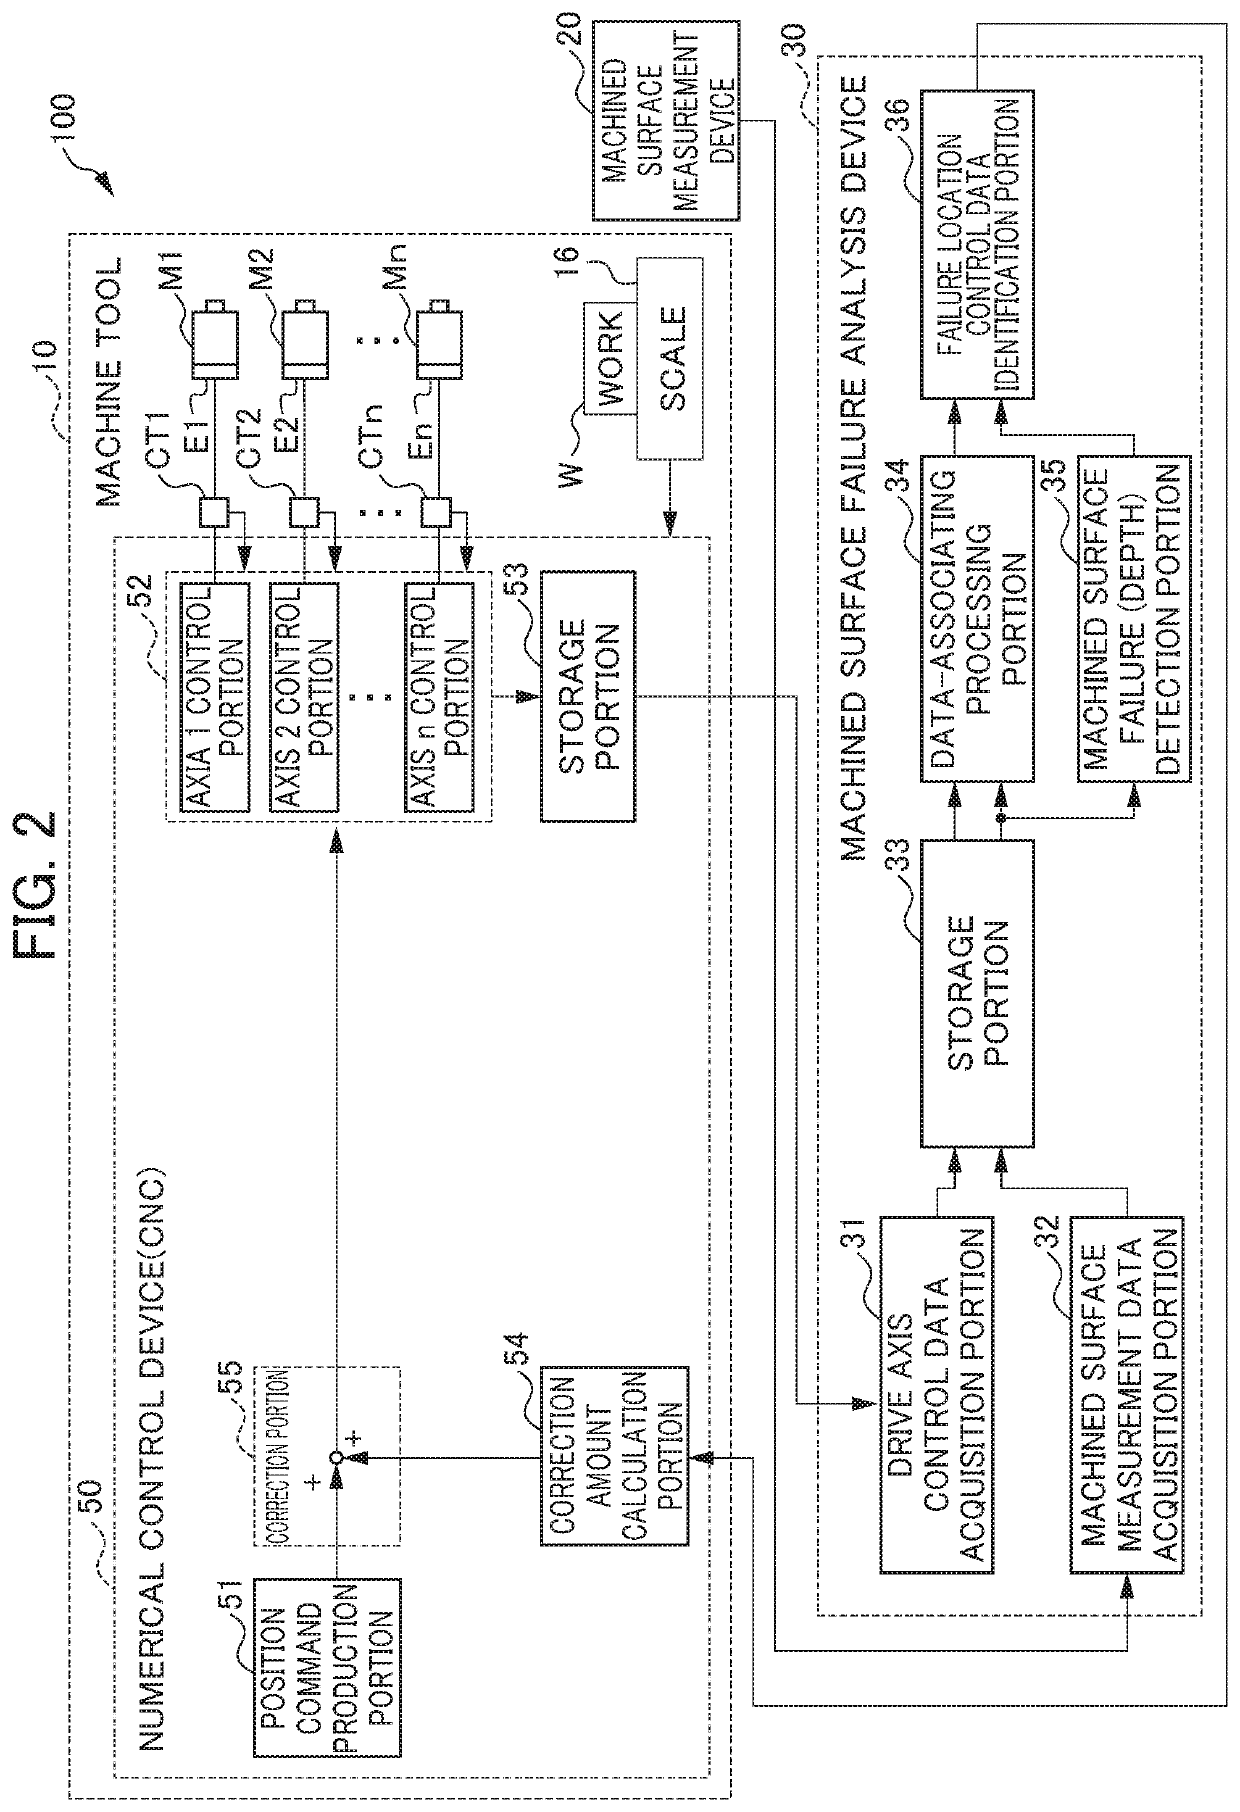 Failure detection and correction control system of machine tool using chronological control data